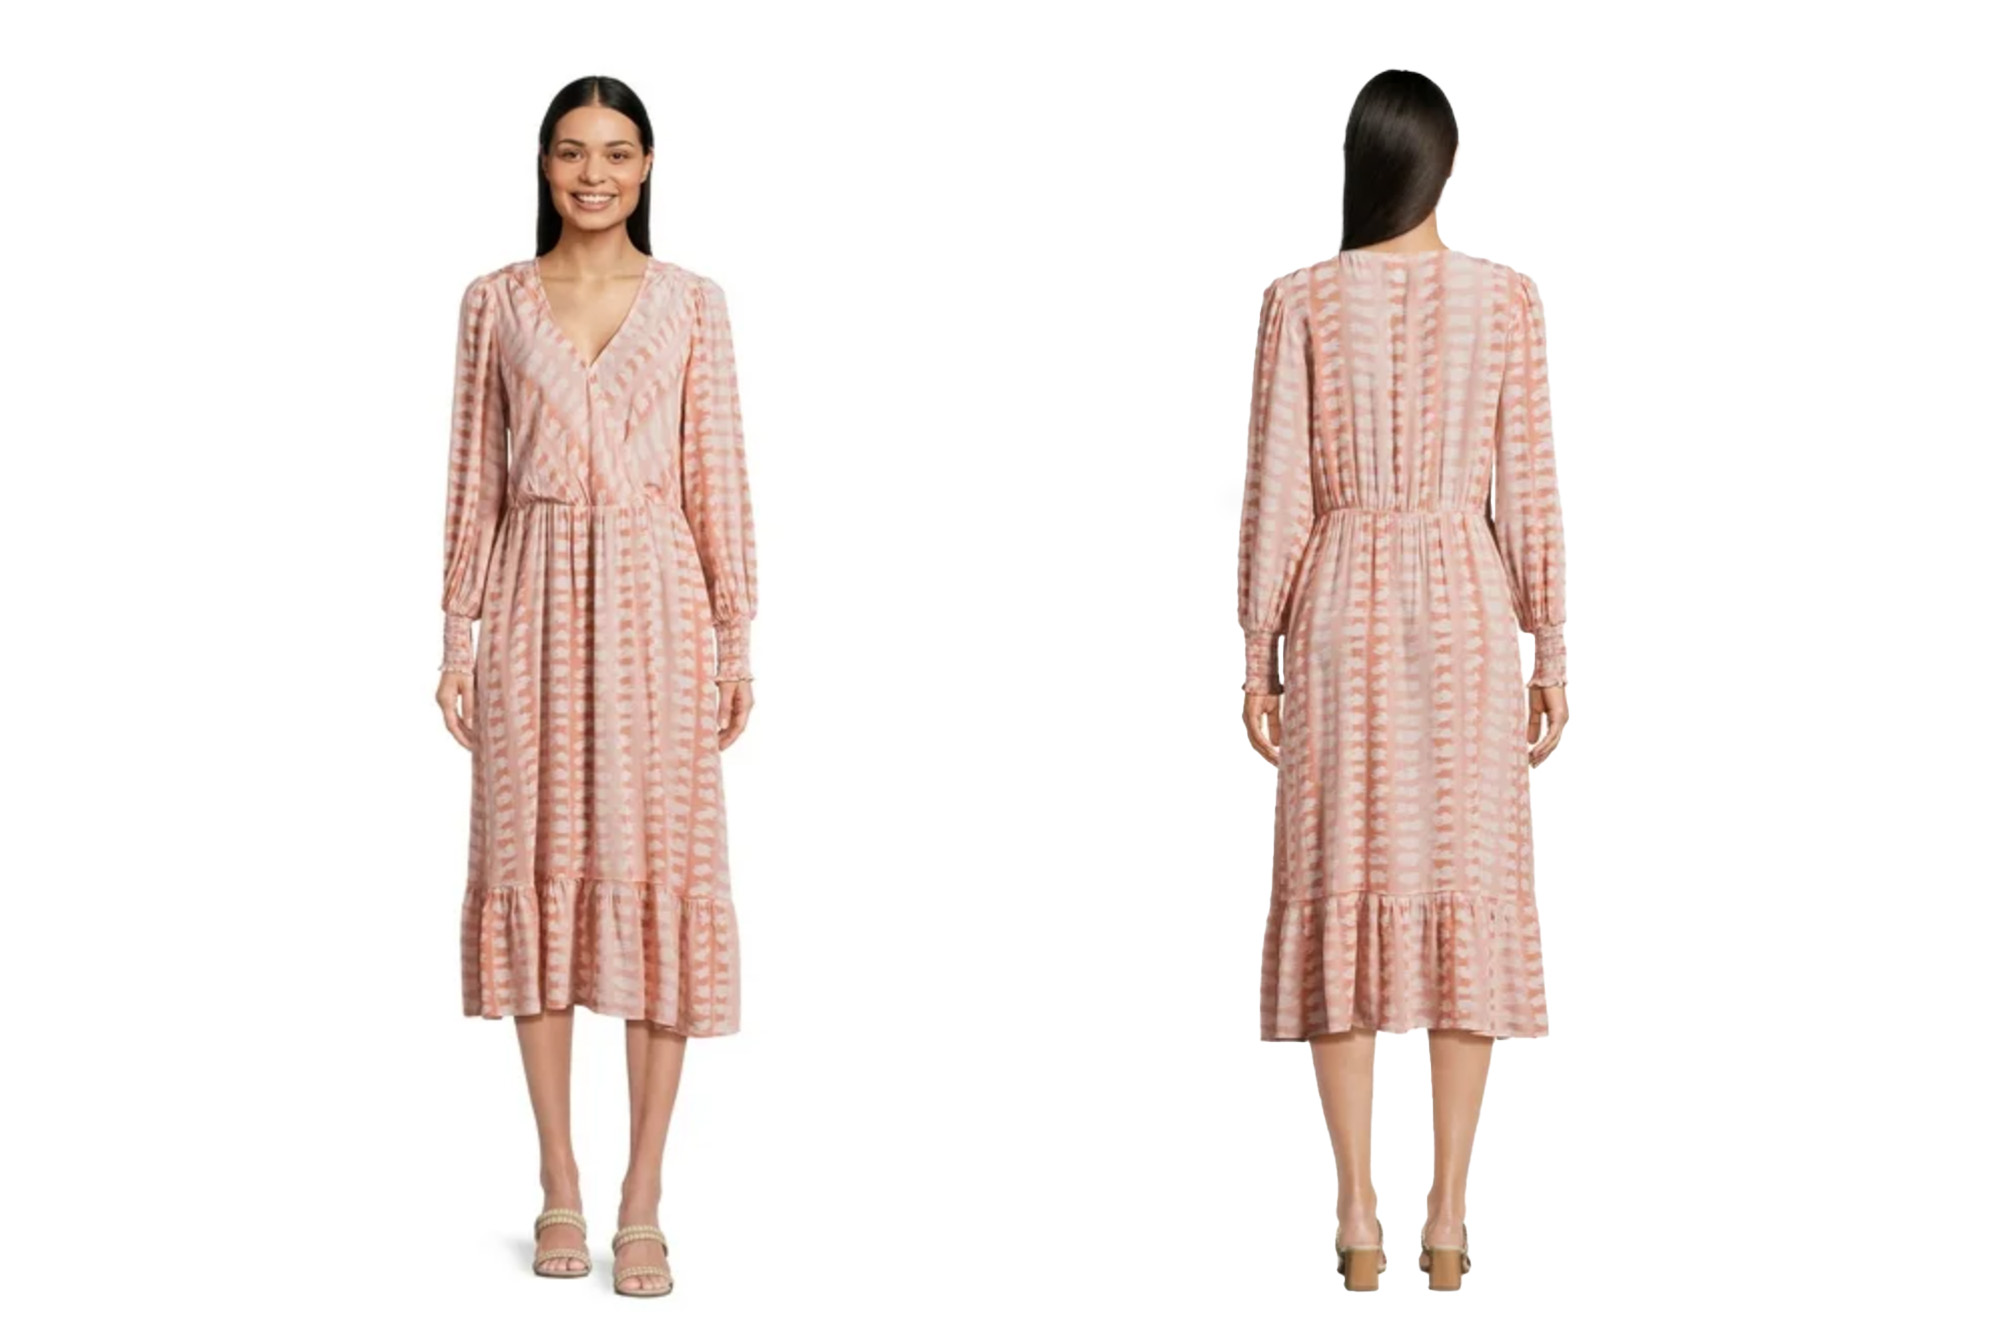 This Lightweight Midi Dress Is Perfect for Any Outdoor Spring